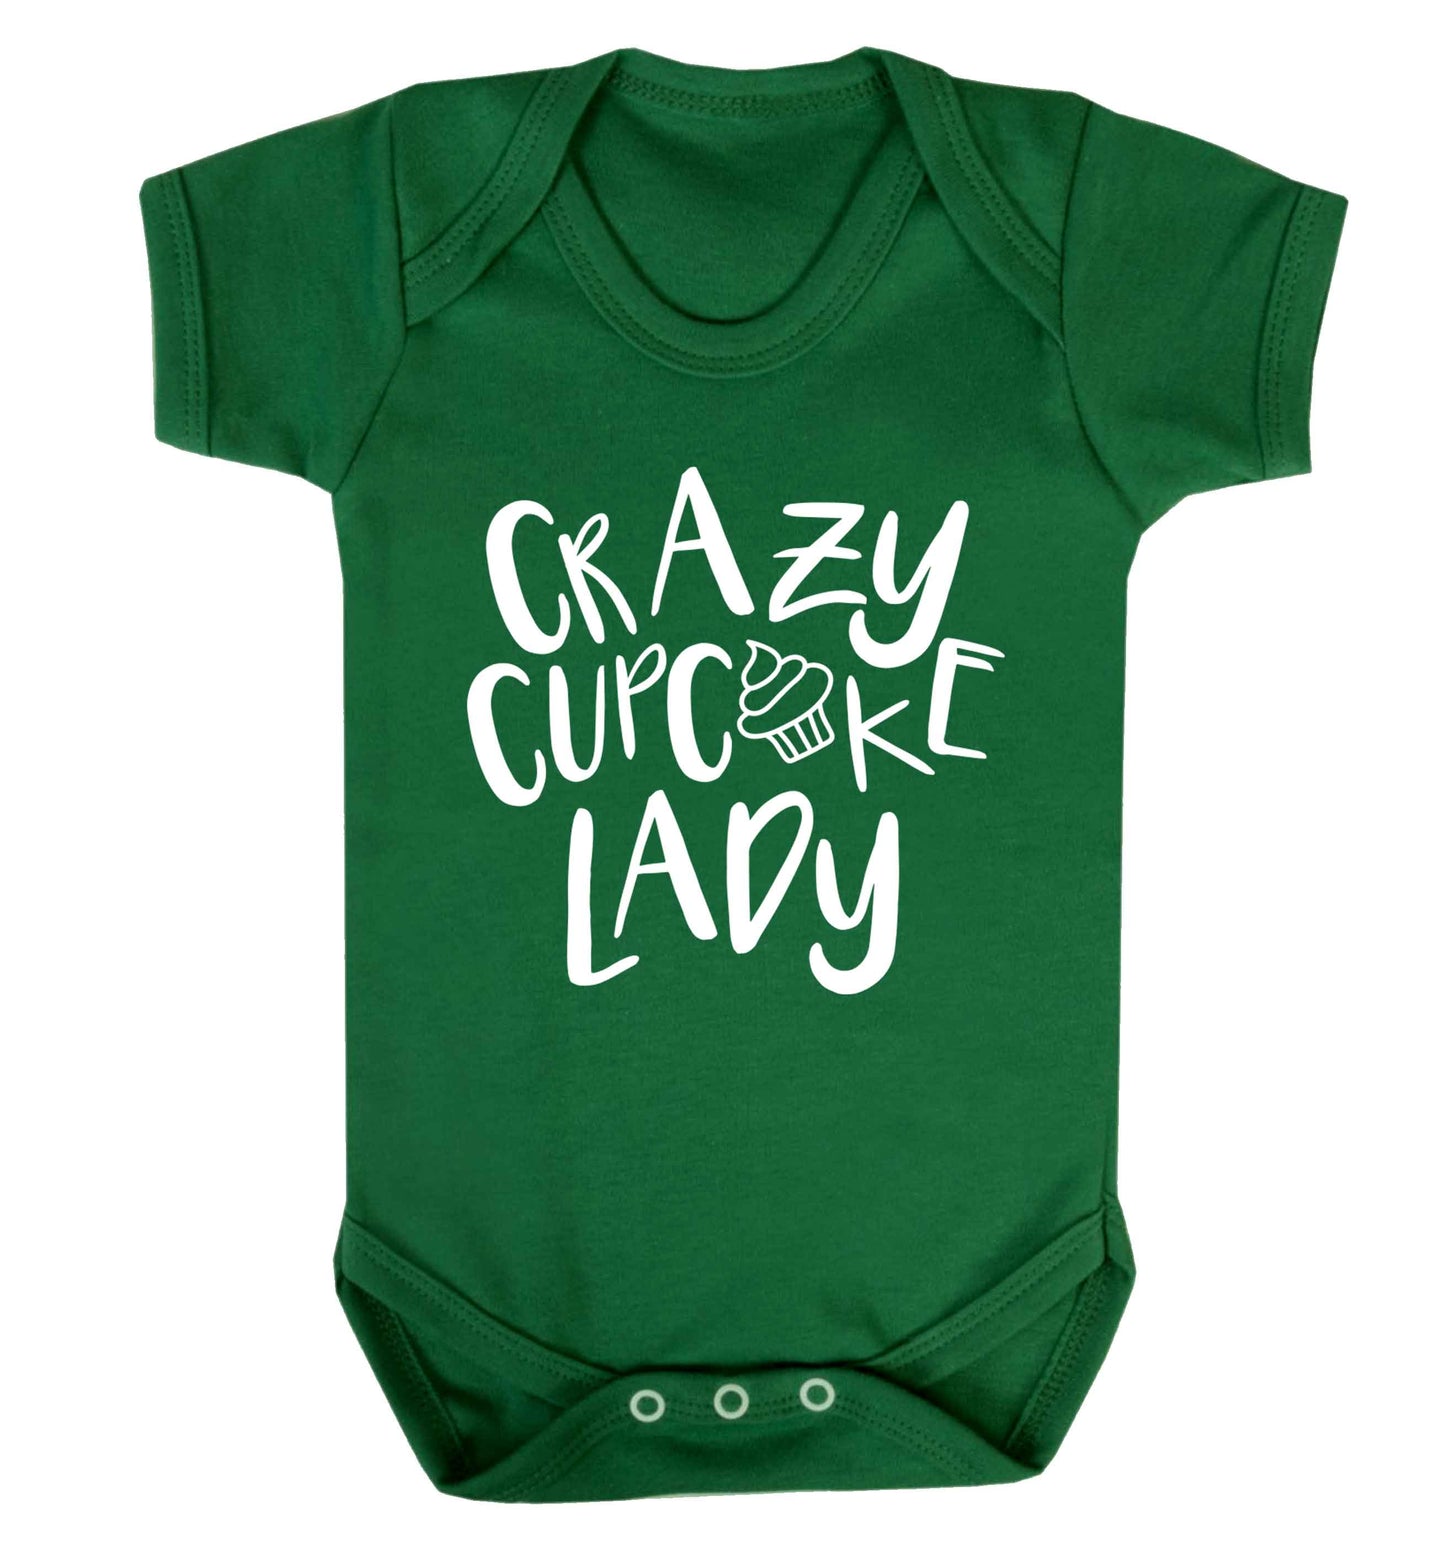 Crazy cupcake lady Baby Vest green 18-24 months